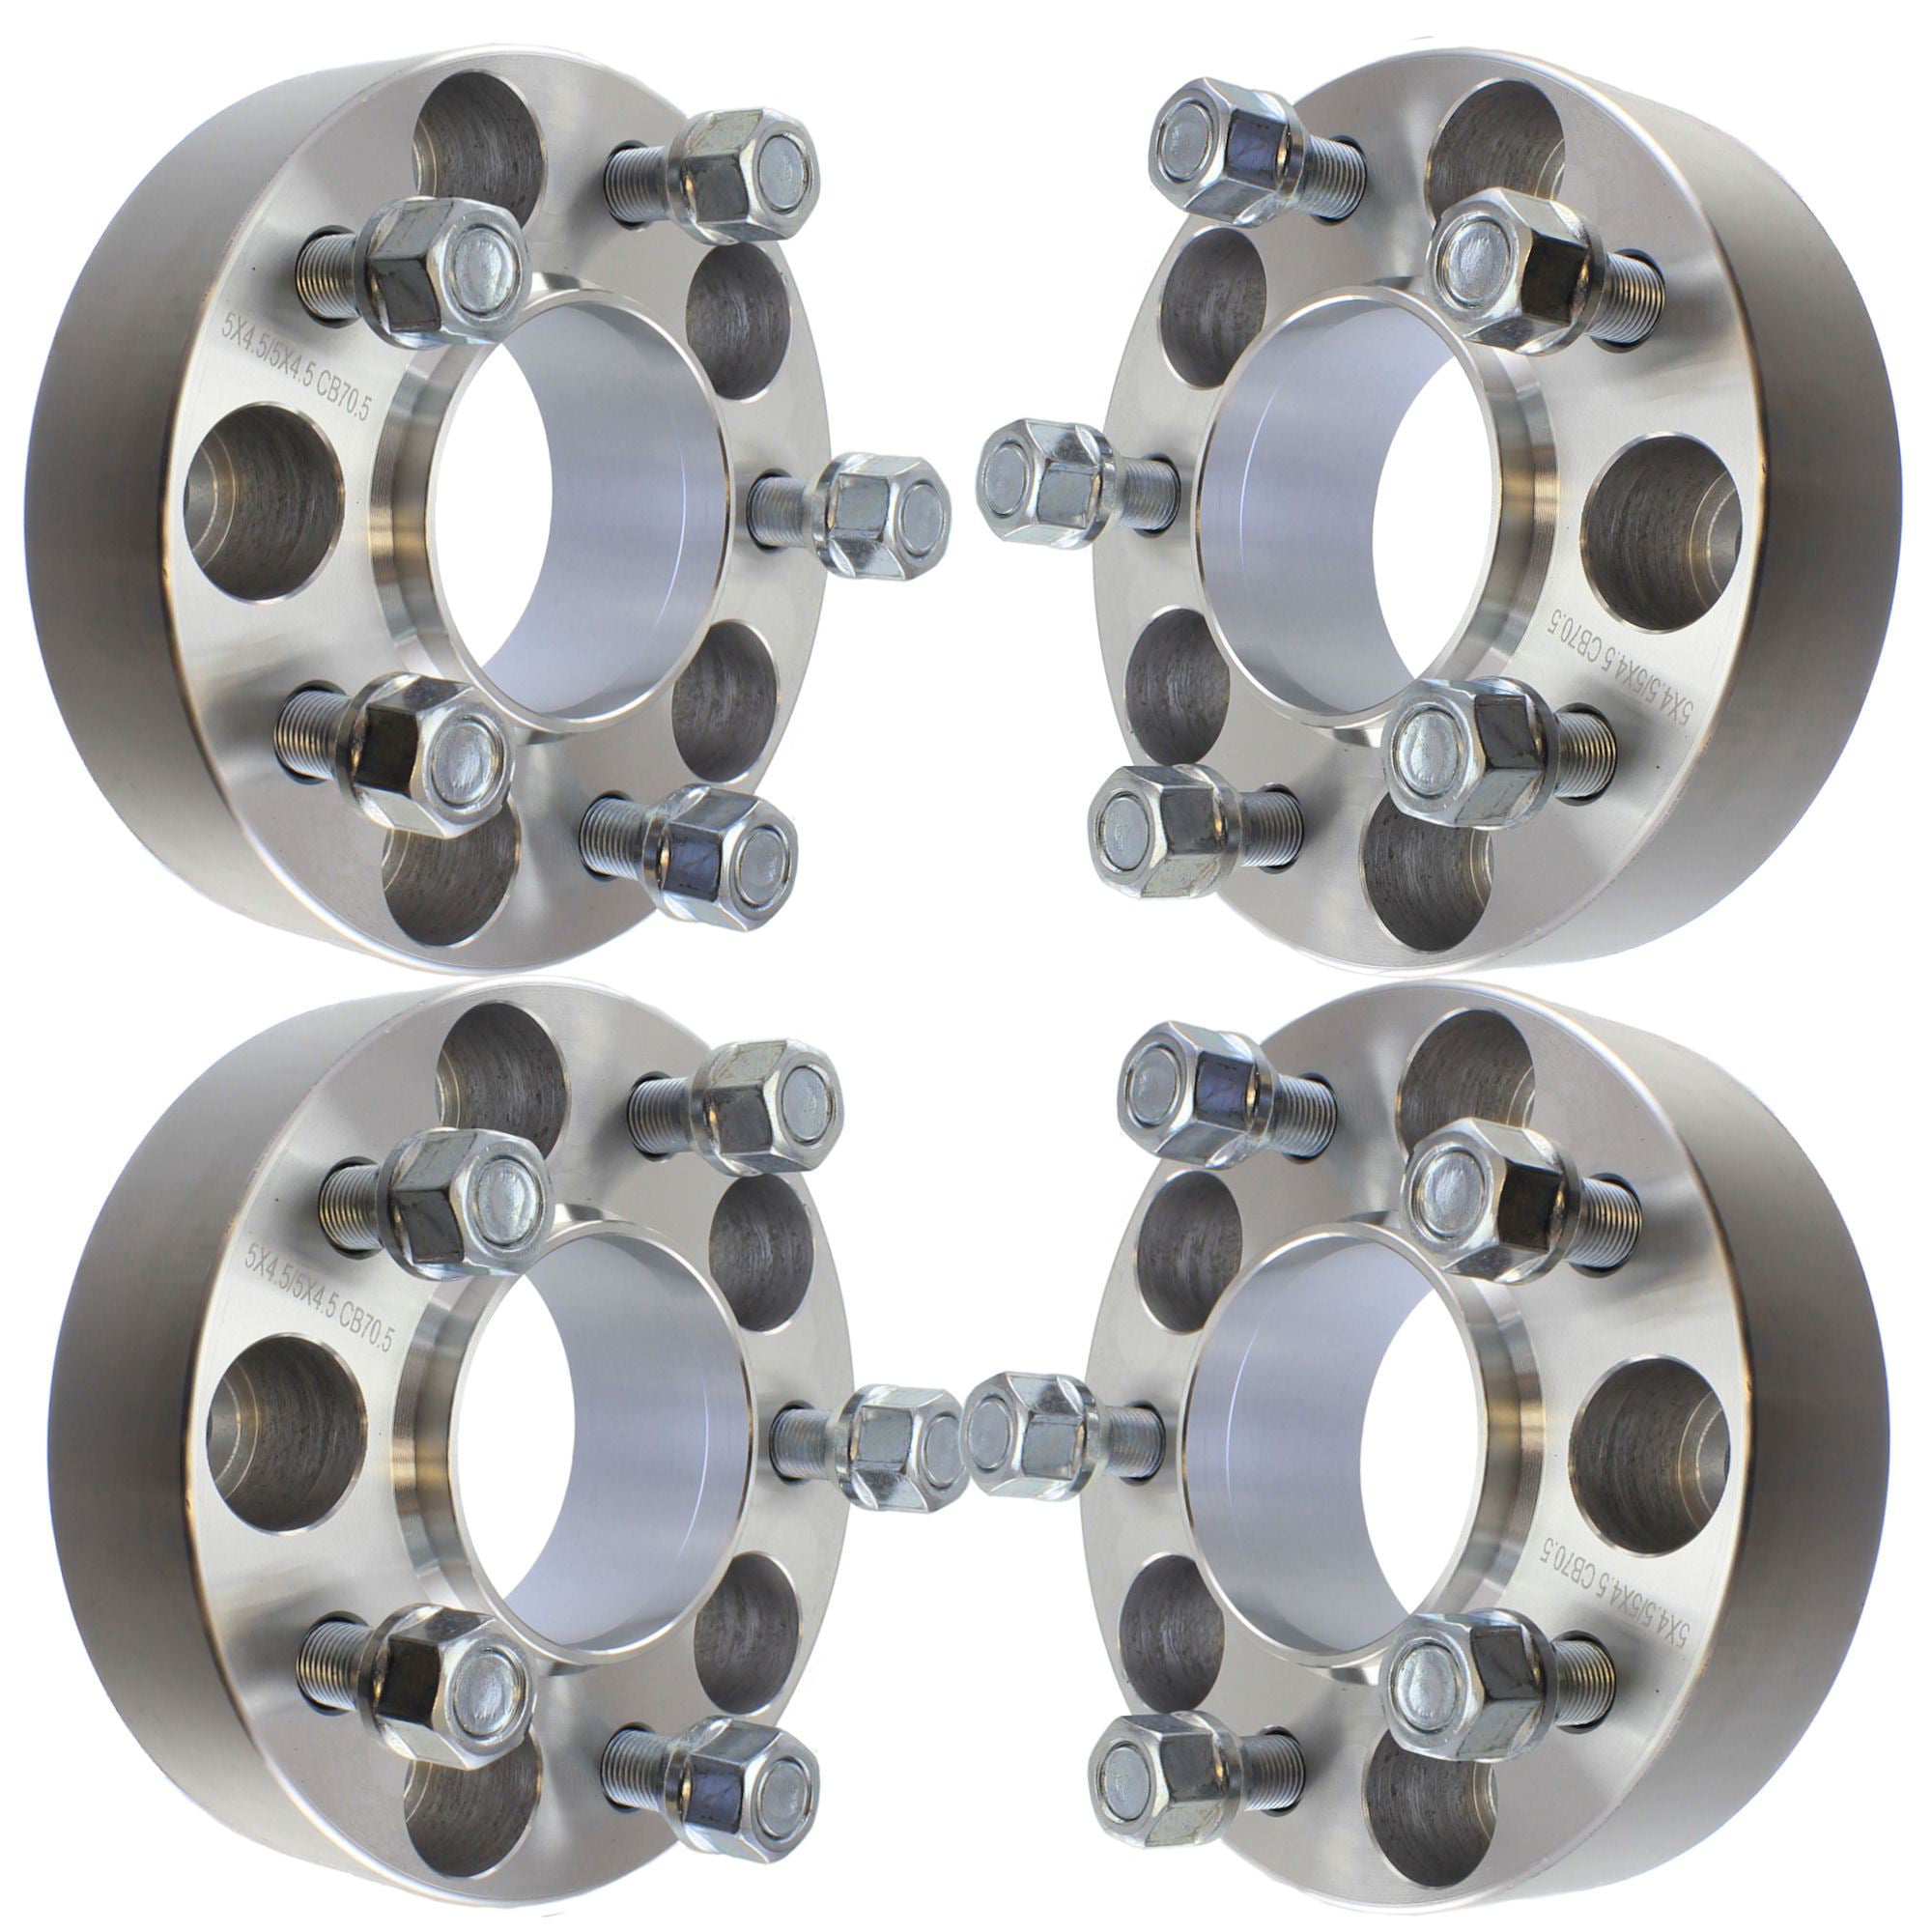 Fits Ford Mustang Ranger Explorer and More Billet 3/8 Flat Wheel Spacers Adapters 5x4.5 2 